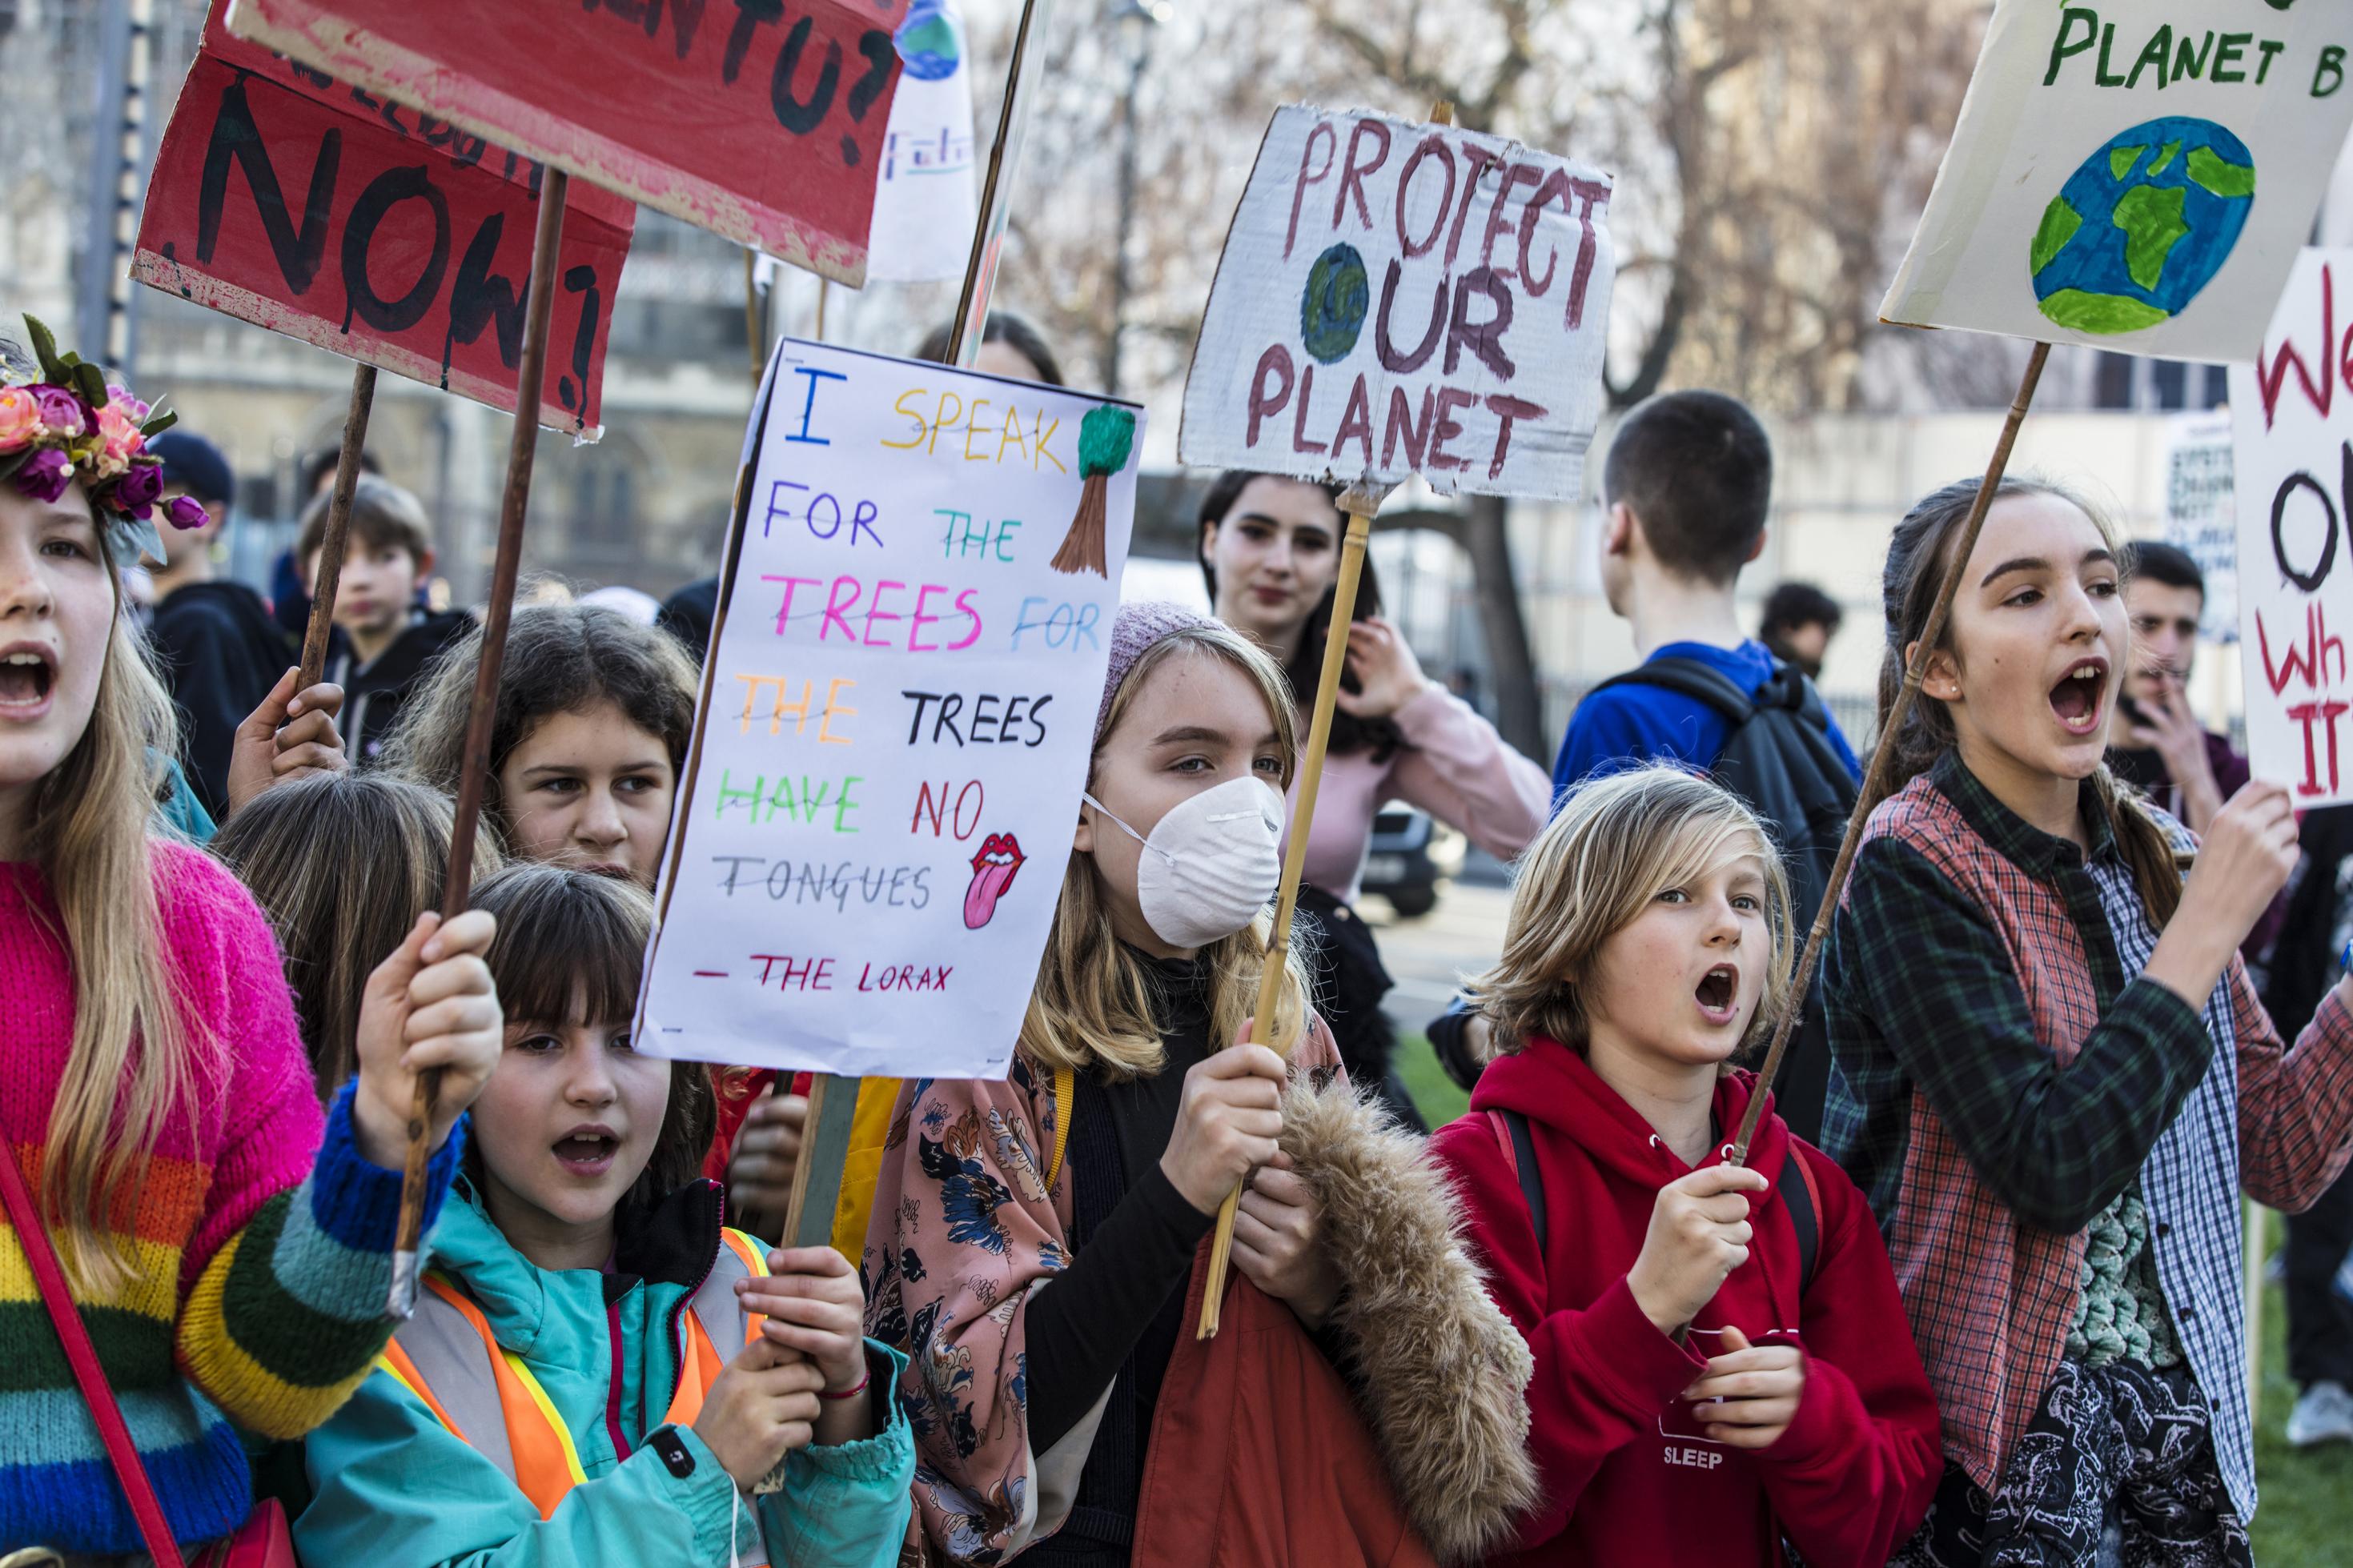 LONDON, UK – February 15, 2019: Protestors with banners at a Youth strike for climate march in central London